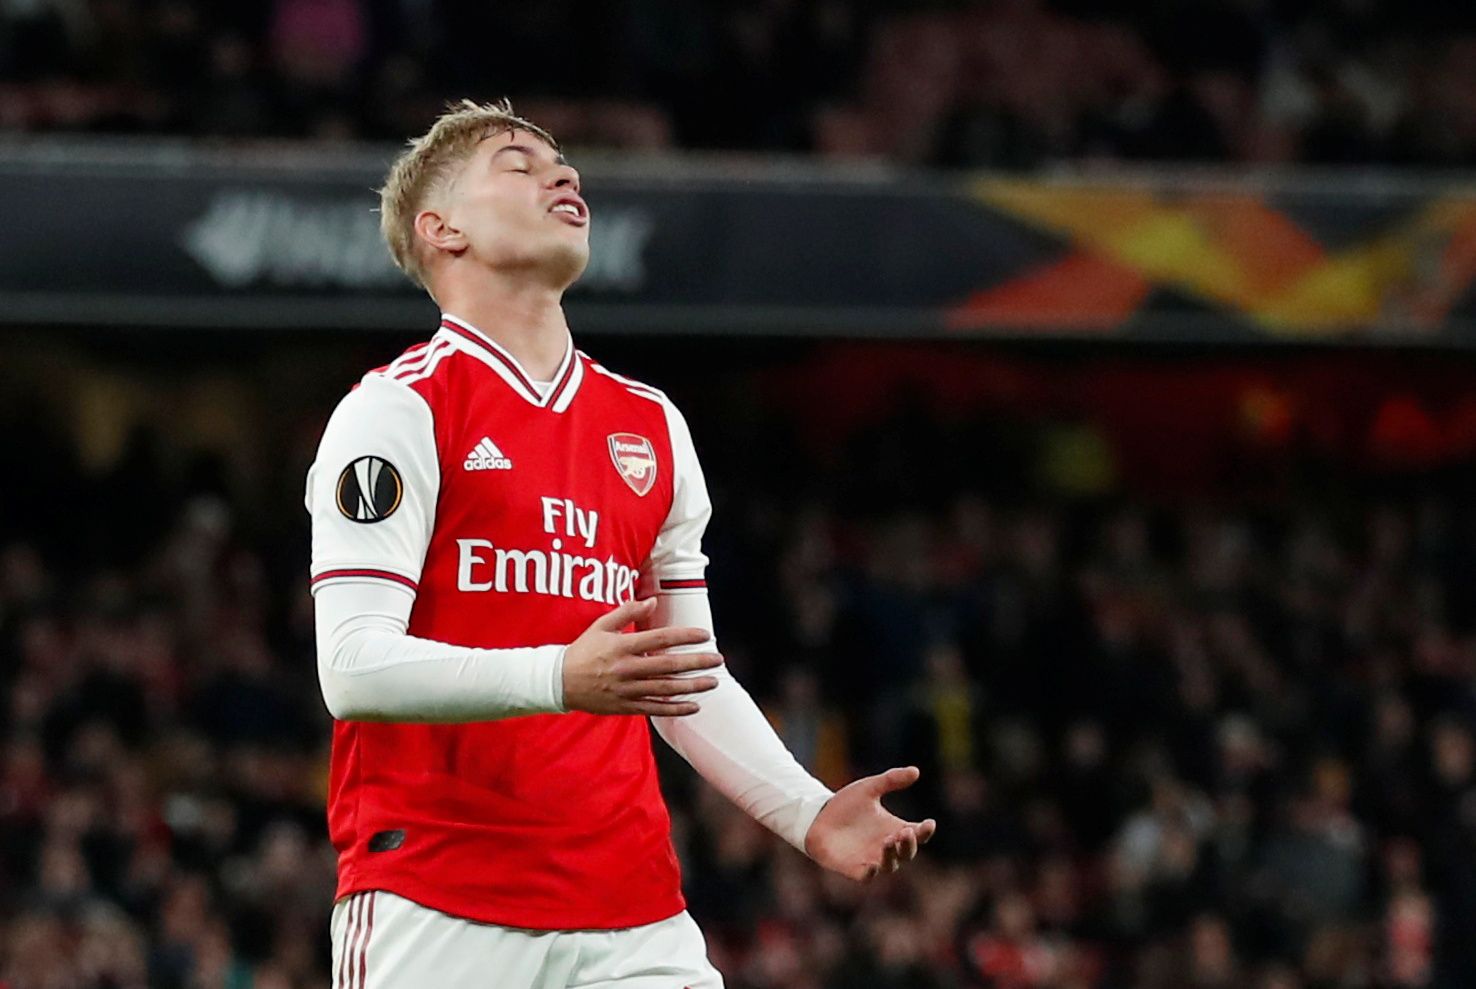 Soccer Football - Europa League - Group F - Arsenal v Vitoria S.C. - Emirates Stadium, London, Britain - October 24, 2019  Arsenal's Emile Smith Rowe reacts  Action Images via Reuters/Andrew Boyers